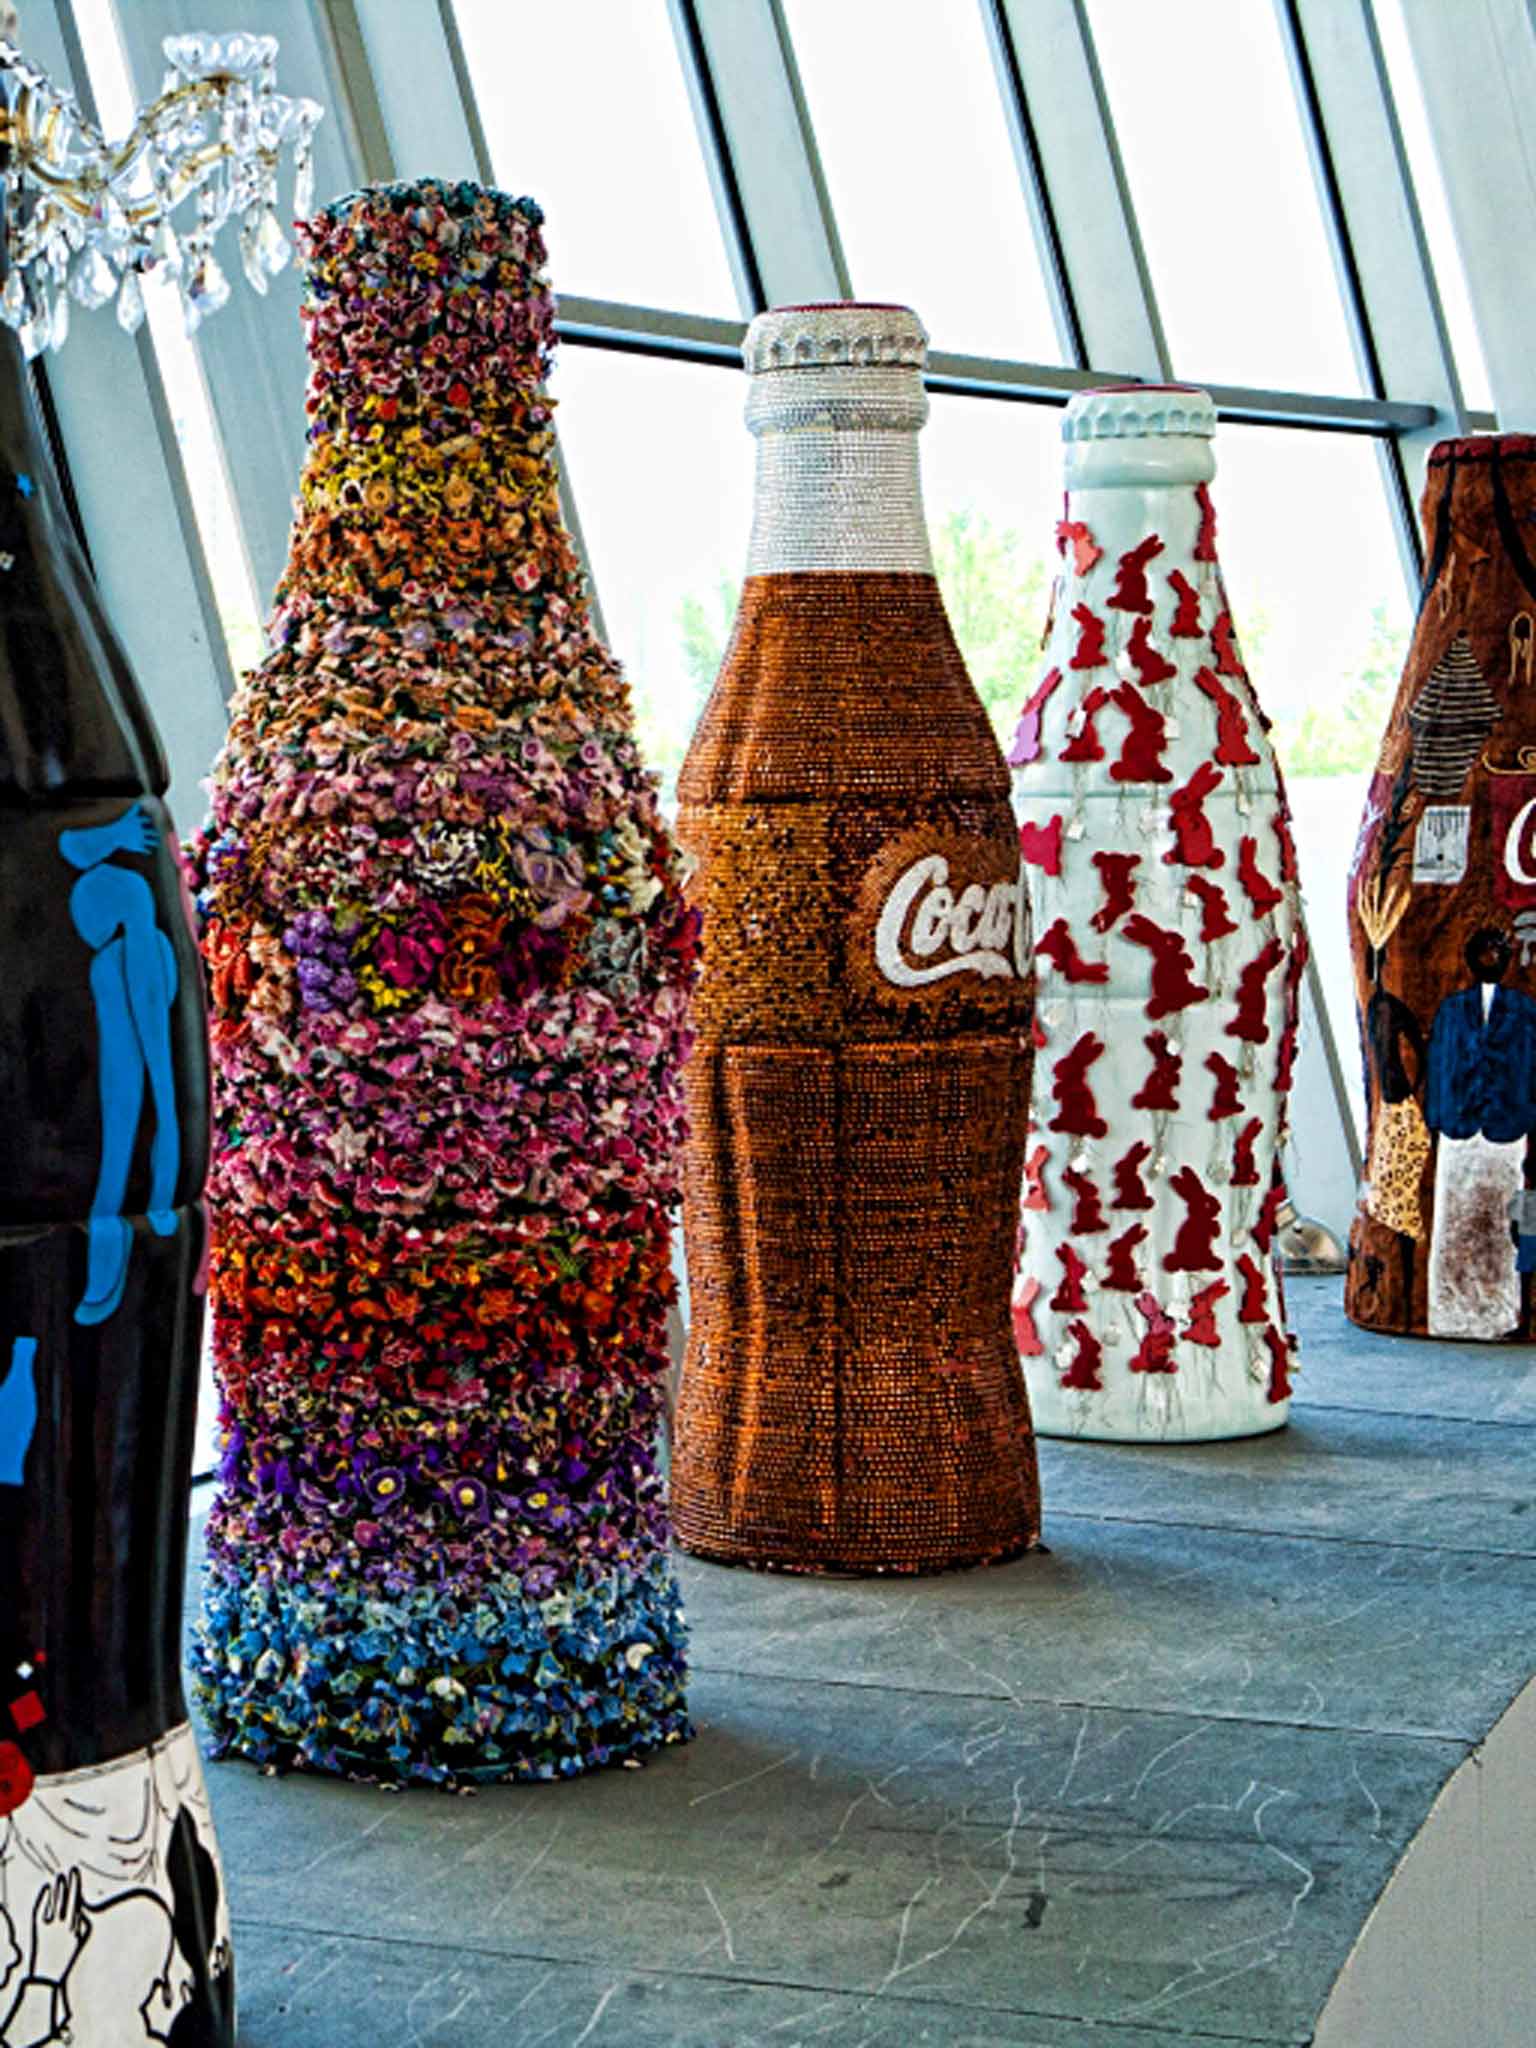 Drink up: World of Coca-Cola